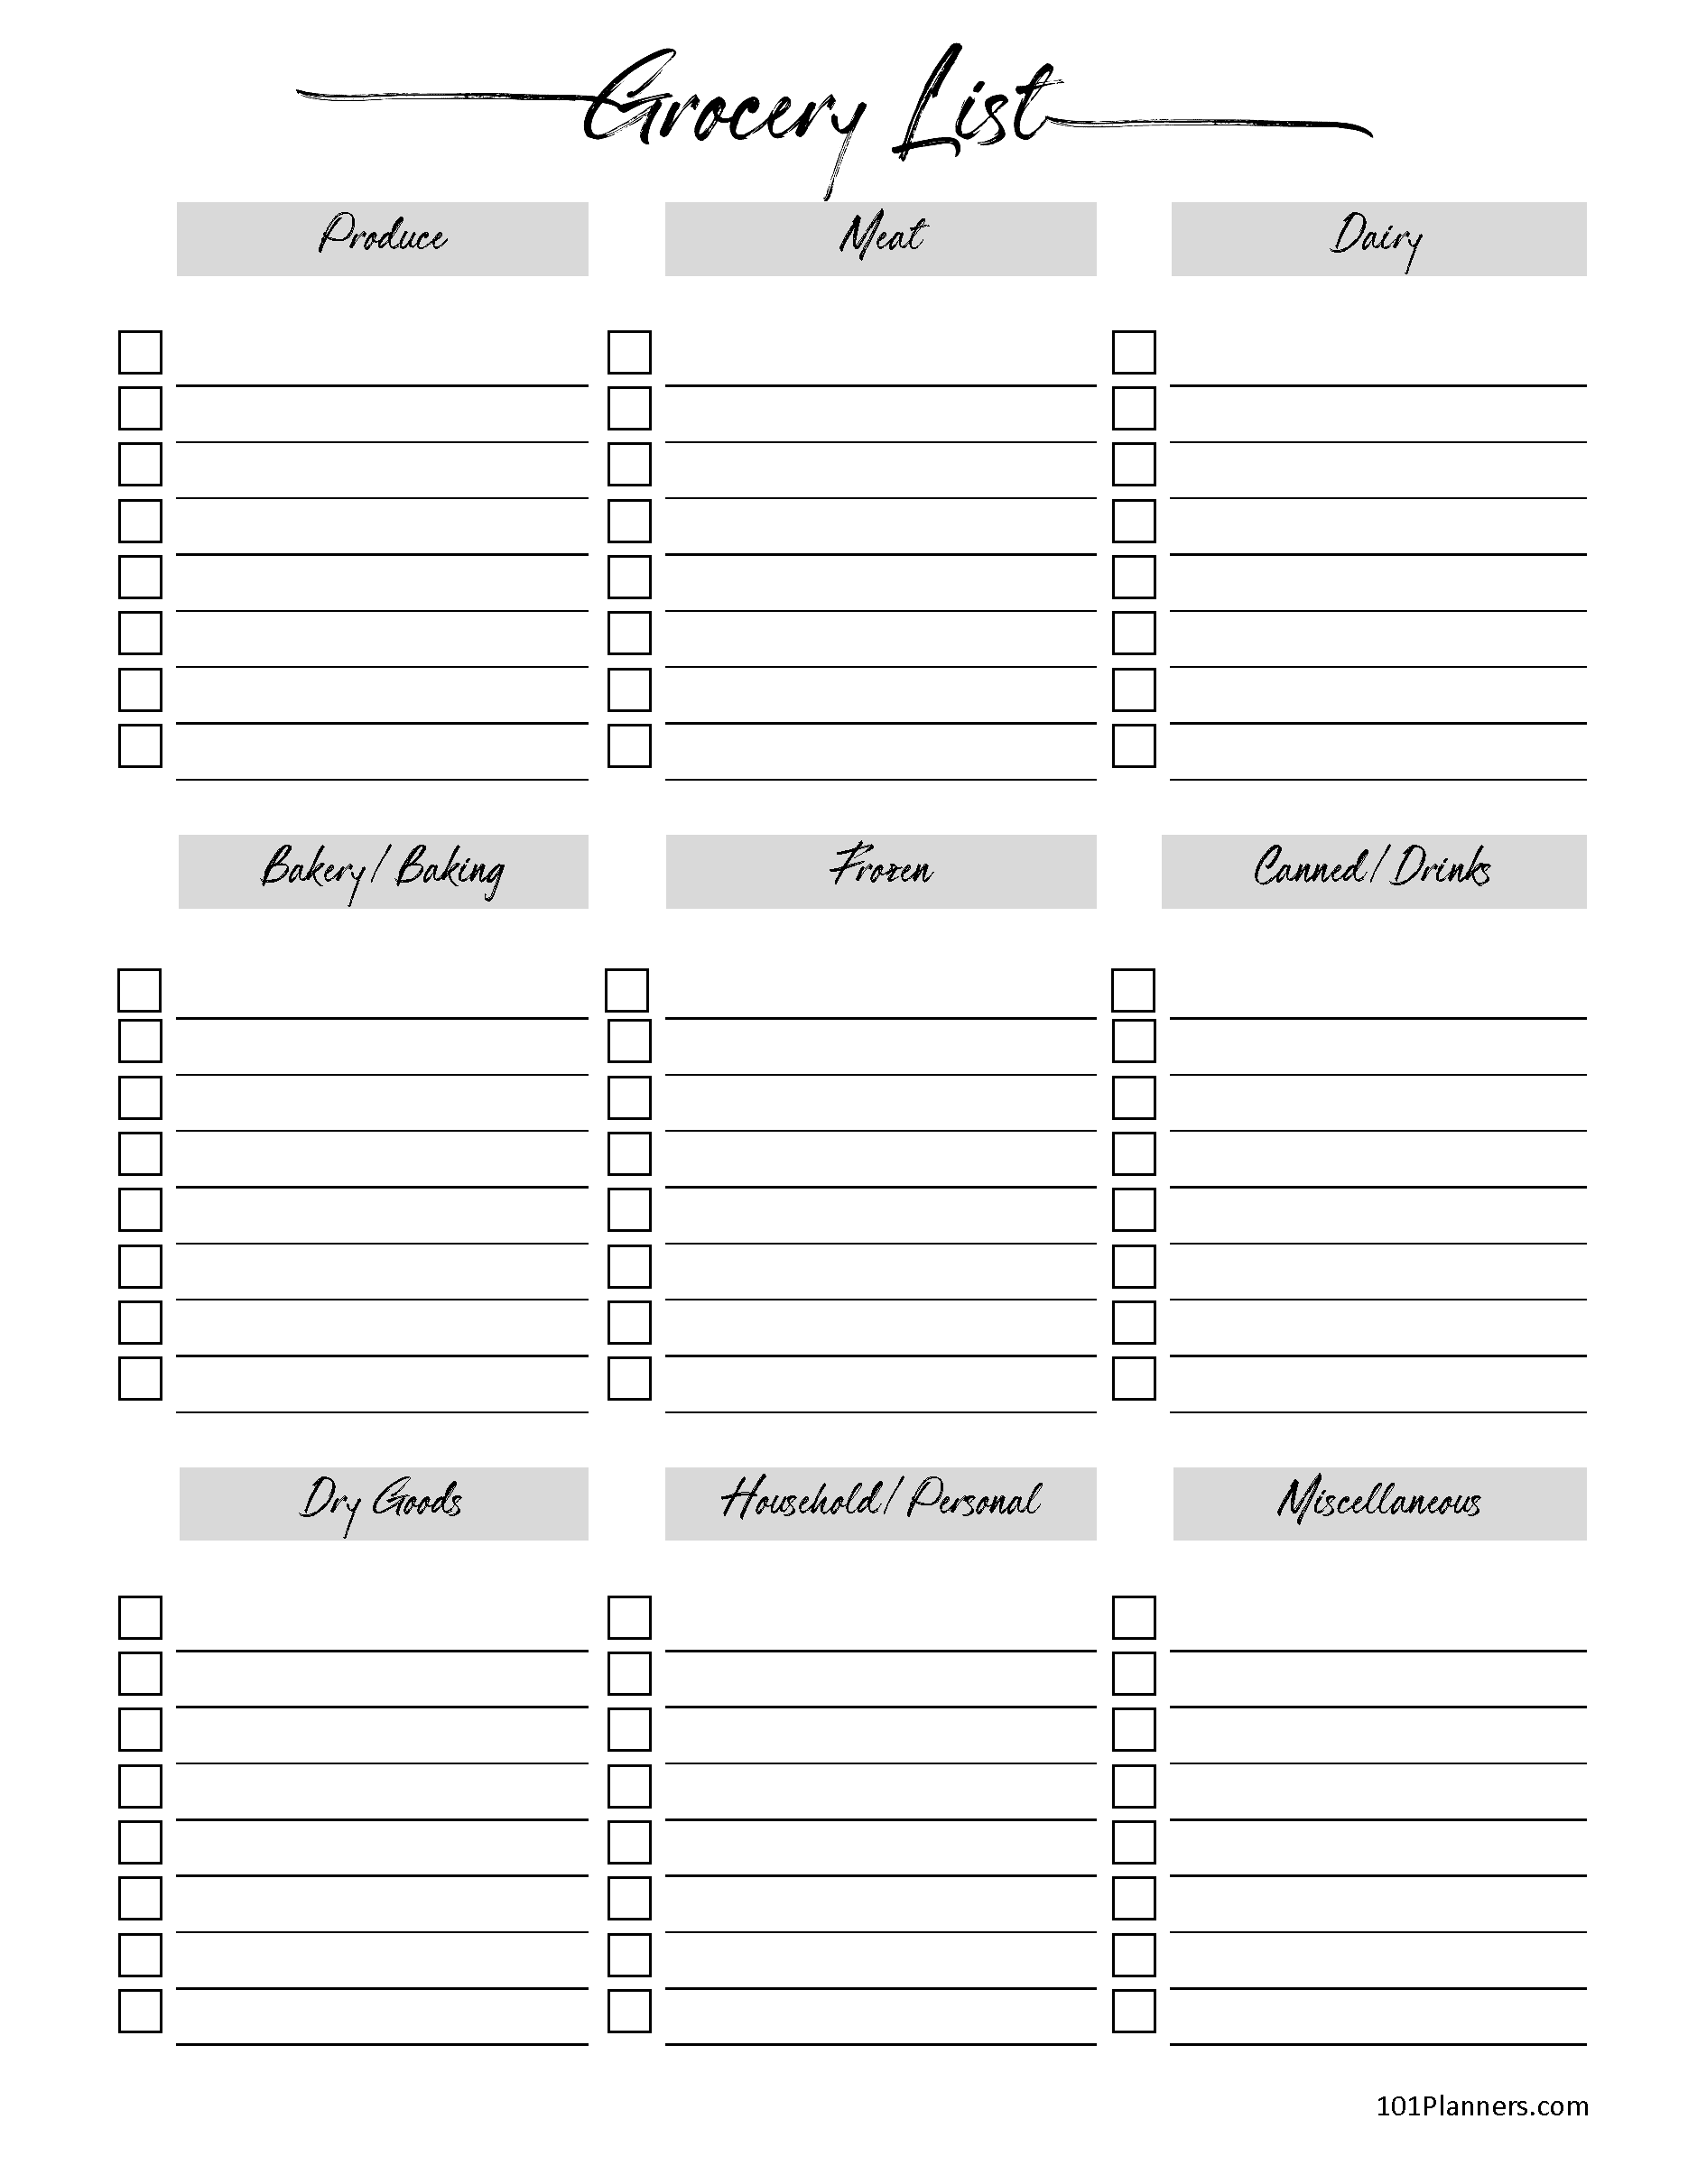 Editable Master Grocery List Shopping List Template Grocery List Template  Printable Digital Meal Planning Grocery List PDF 